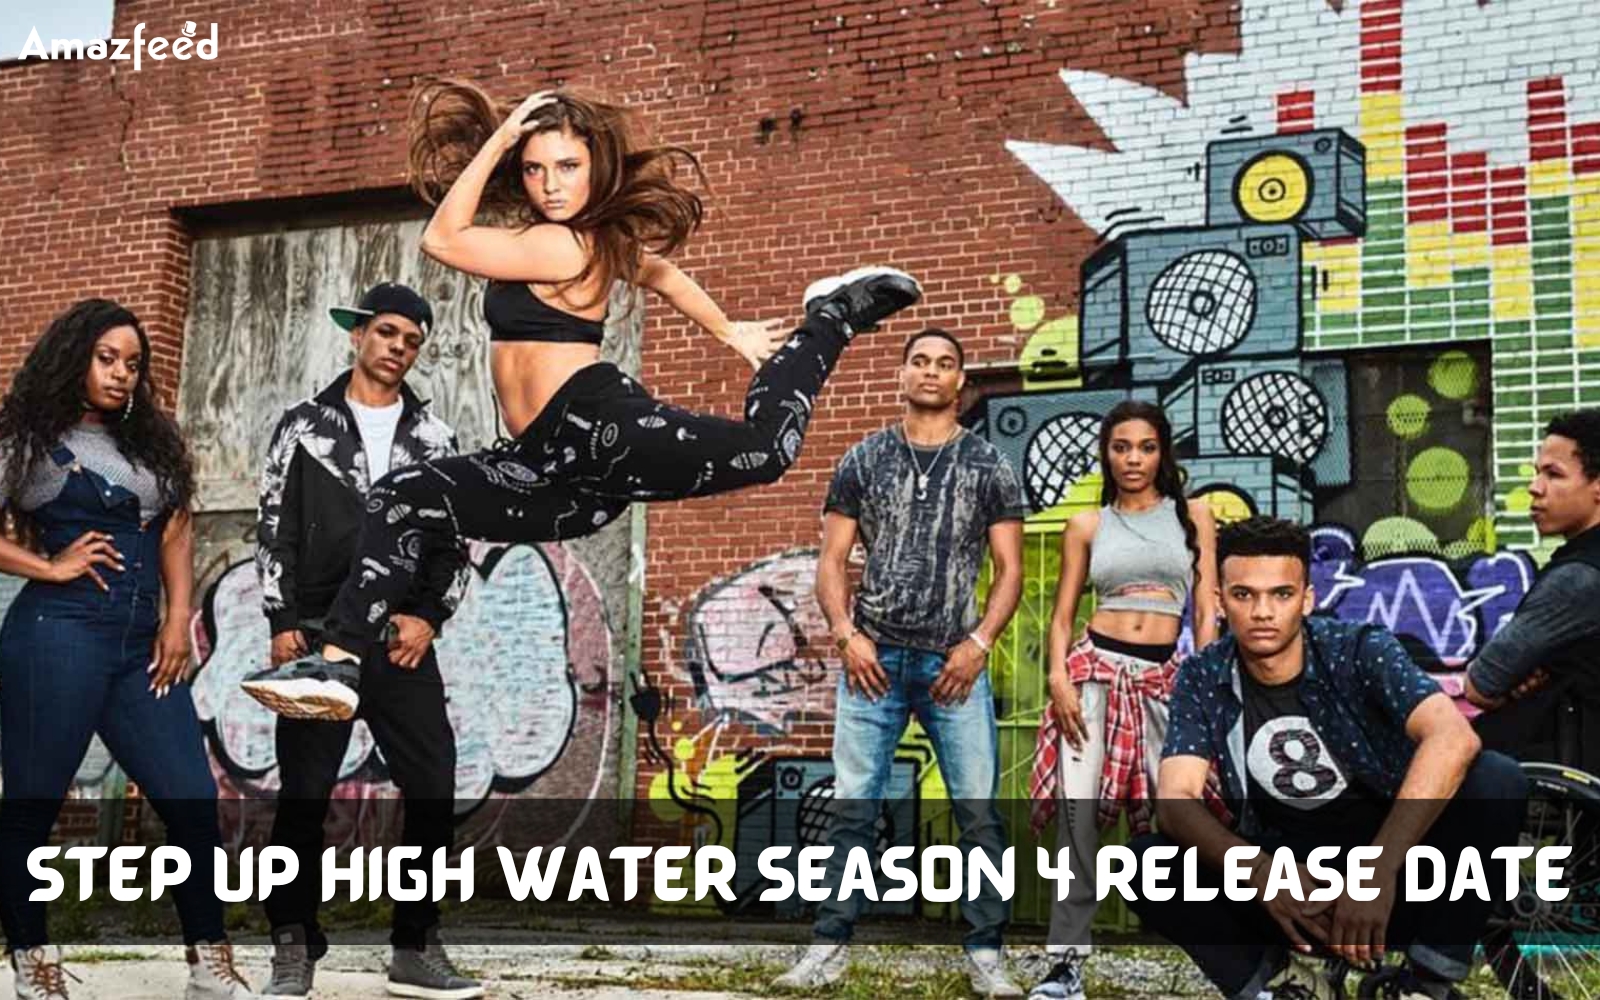 Step up high water season 4 release date